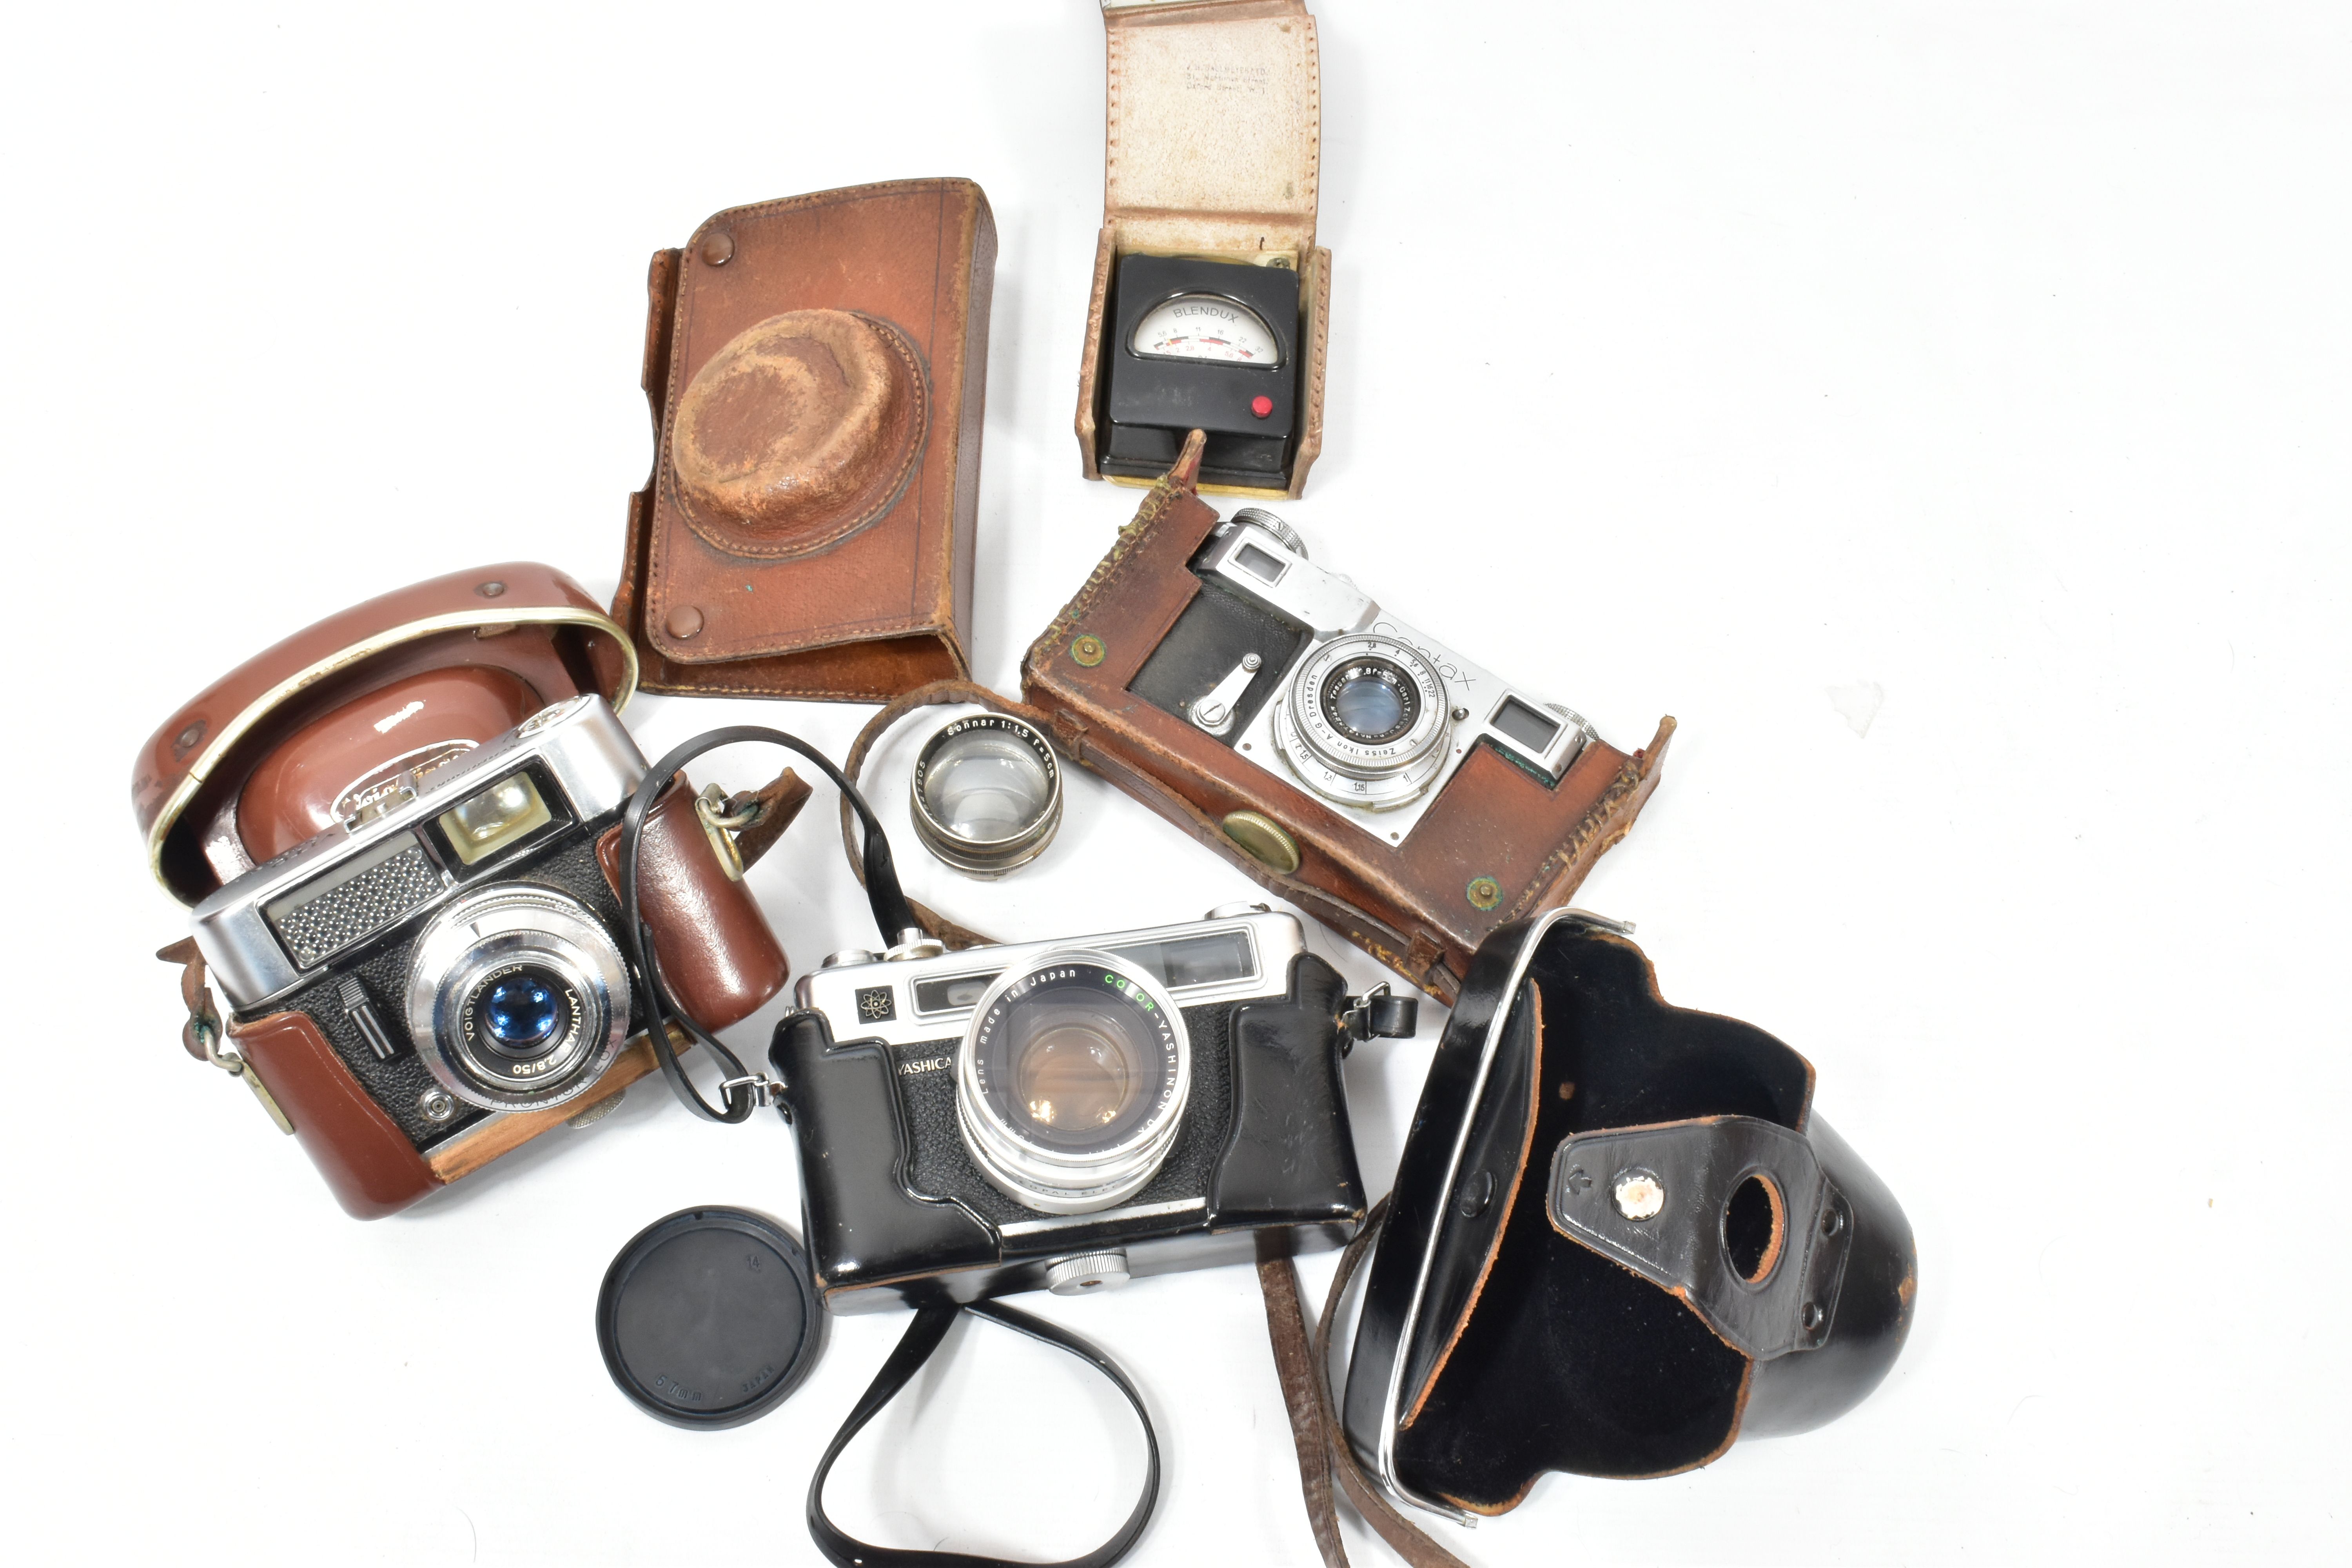 A ZEISS IKON CONTAX 2 SLR CAMERA fitted with a Carl Zeiss Jena Tessar 5cm f2.8 lens in tatty leather